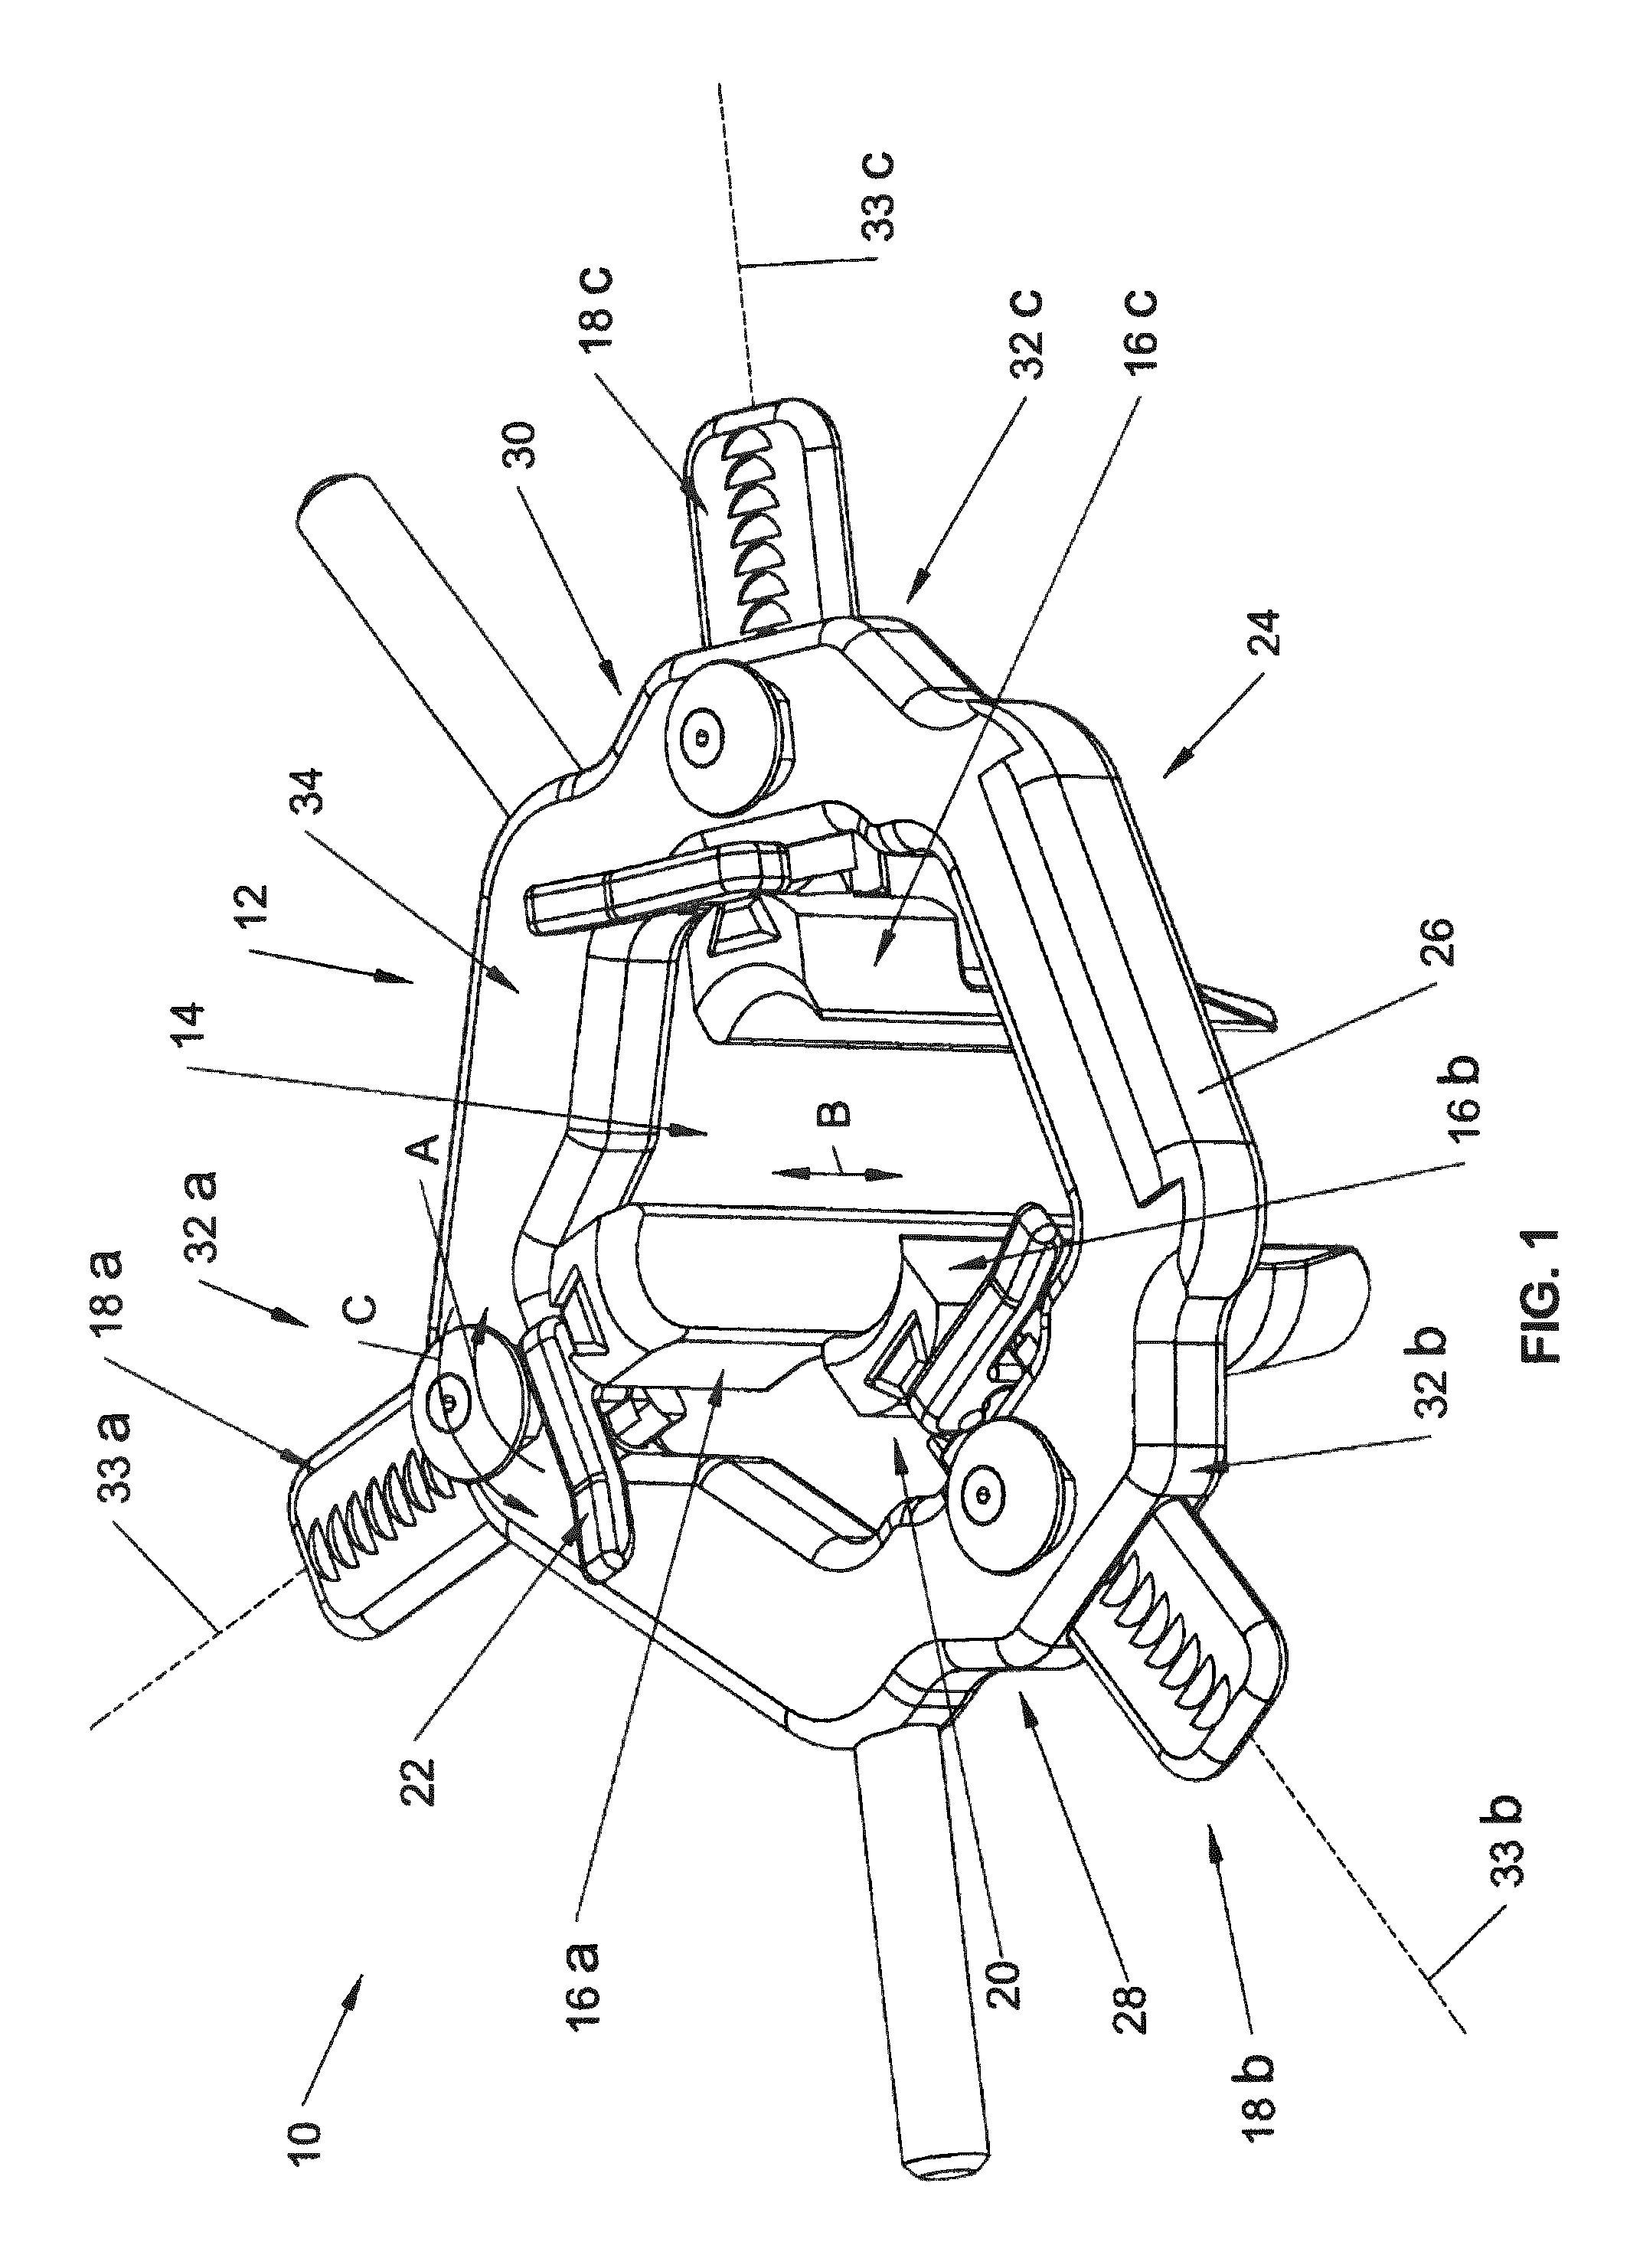 Retraction apparatus and method of use